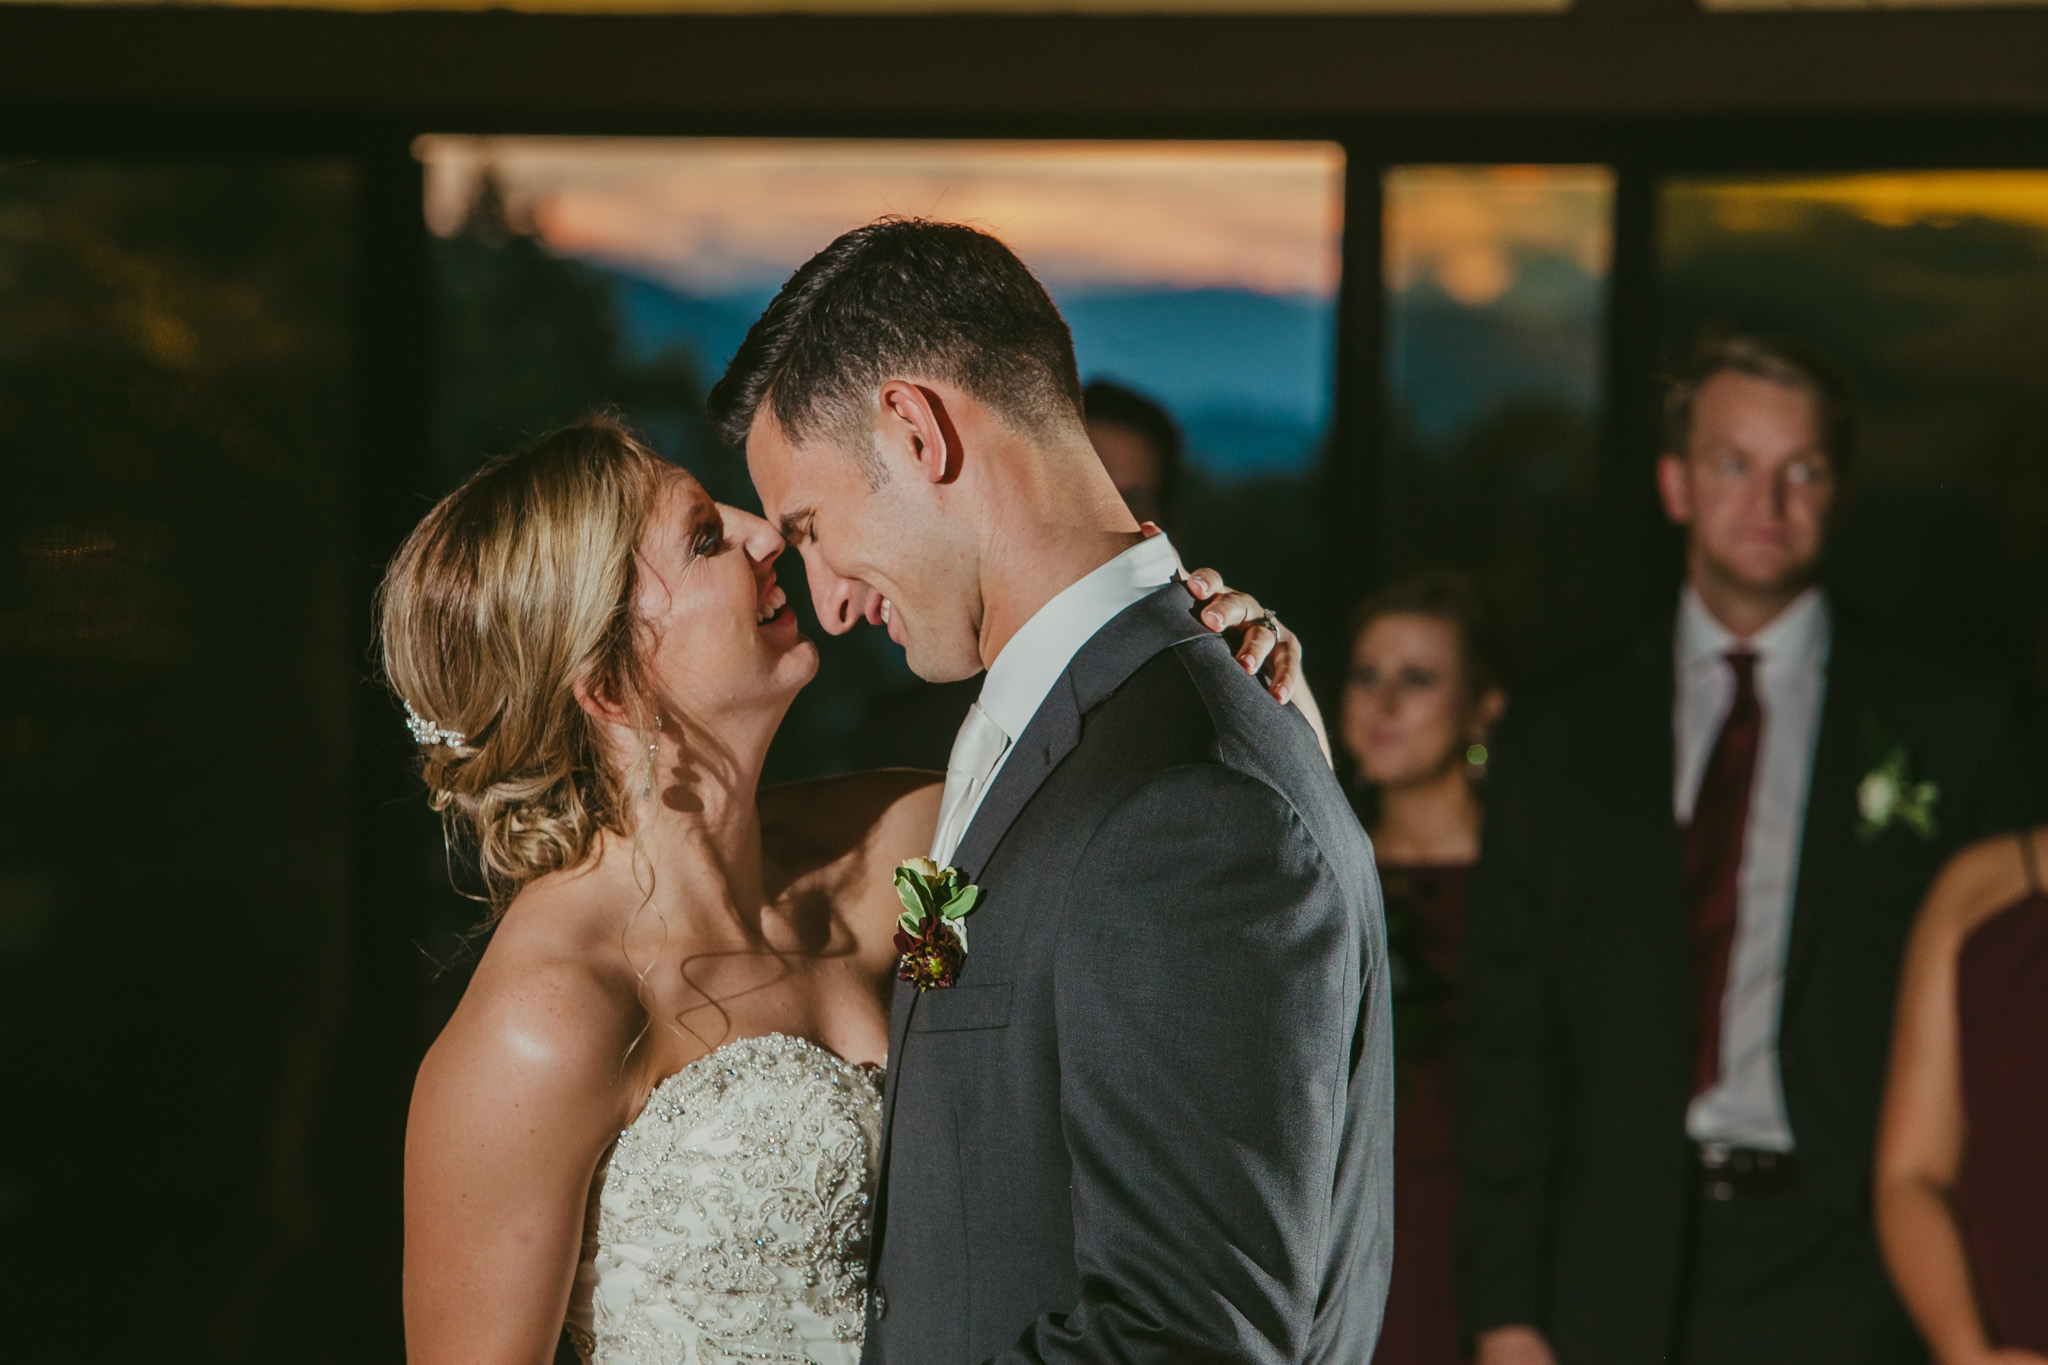 Bride and grooms first dance at their mountain view wedding in Asheville, NC